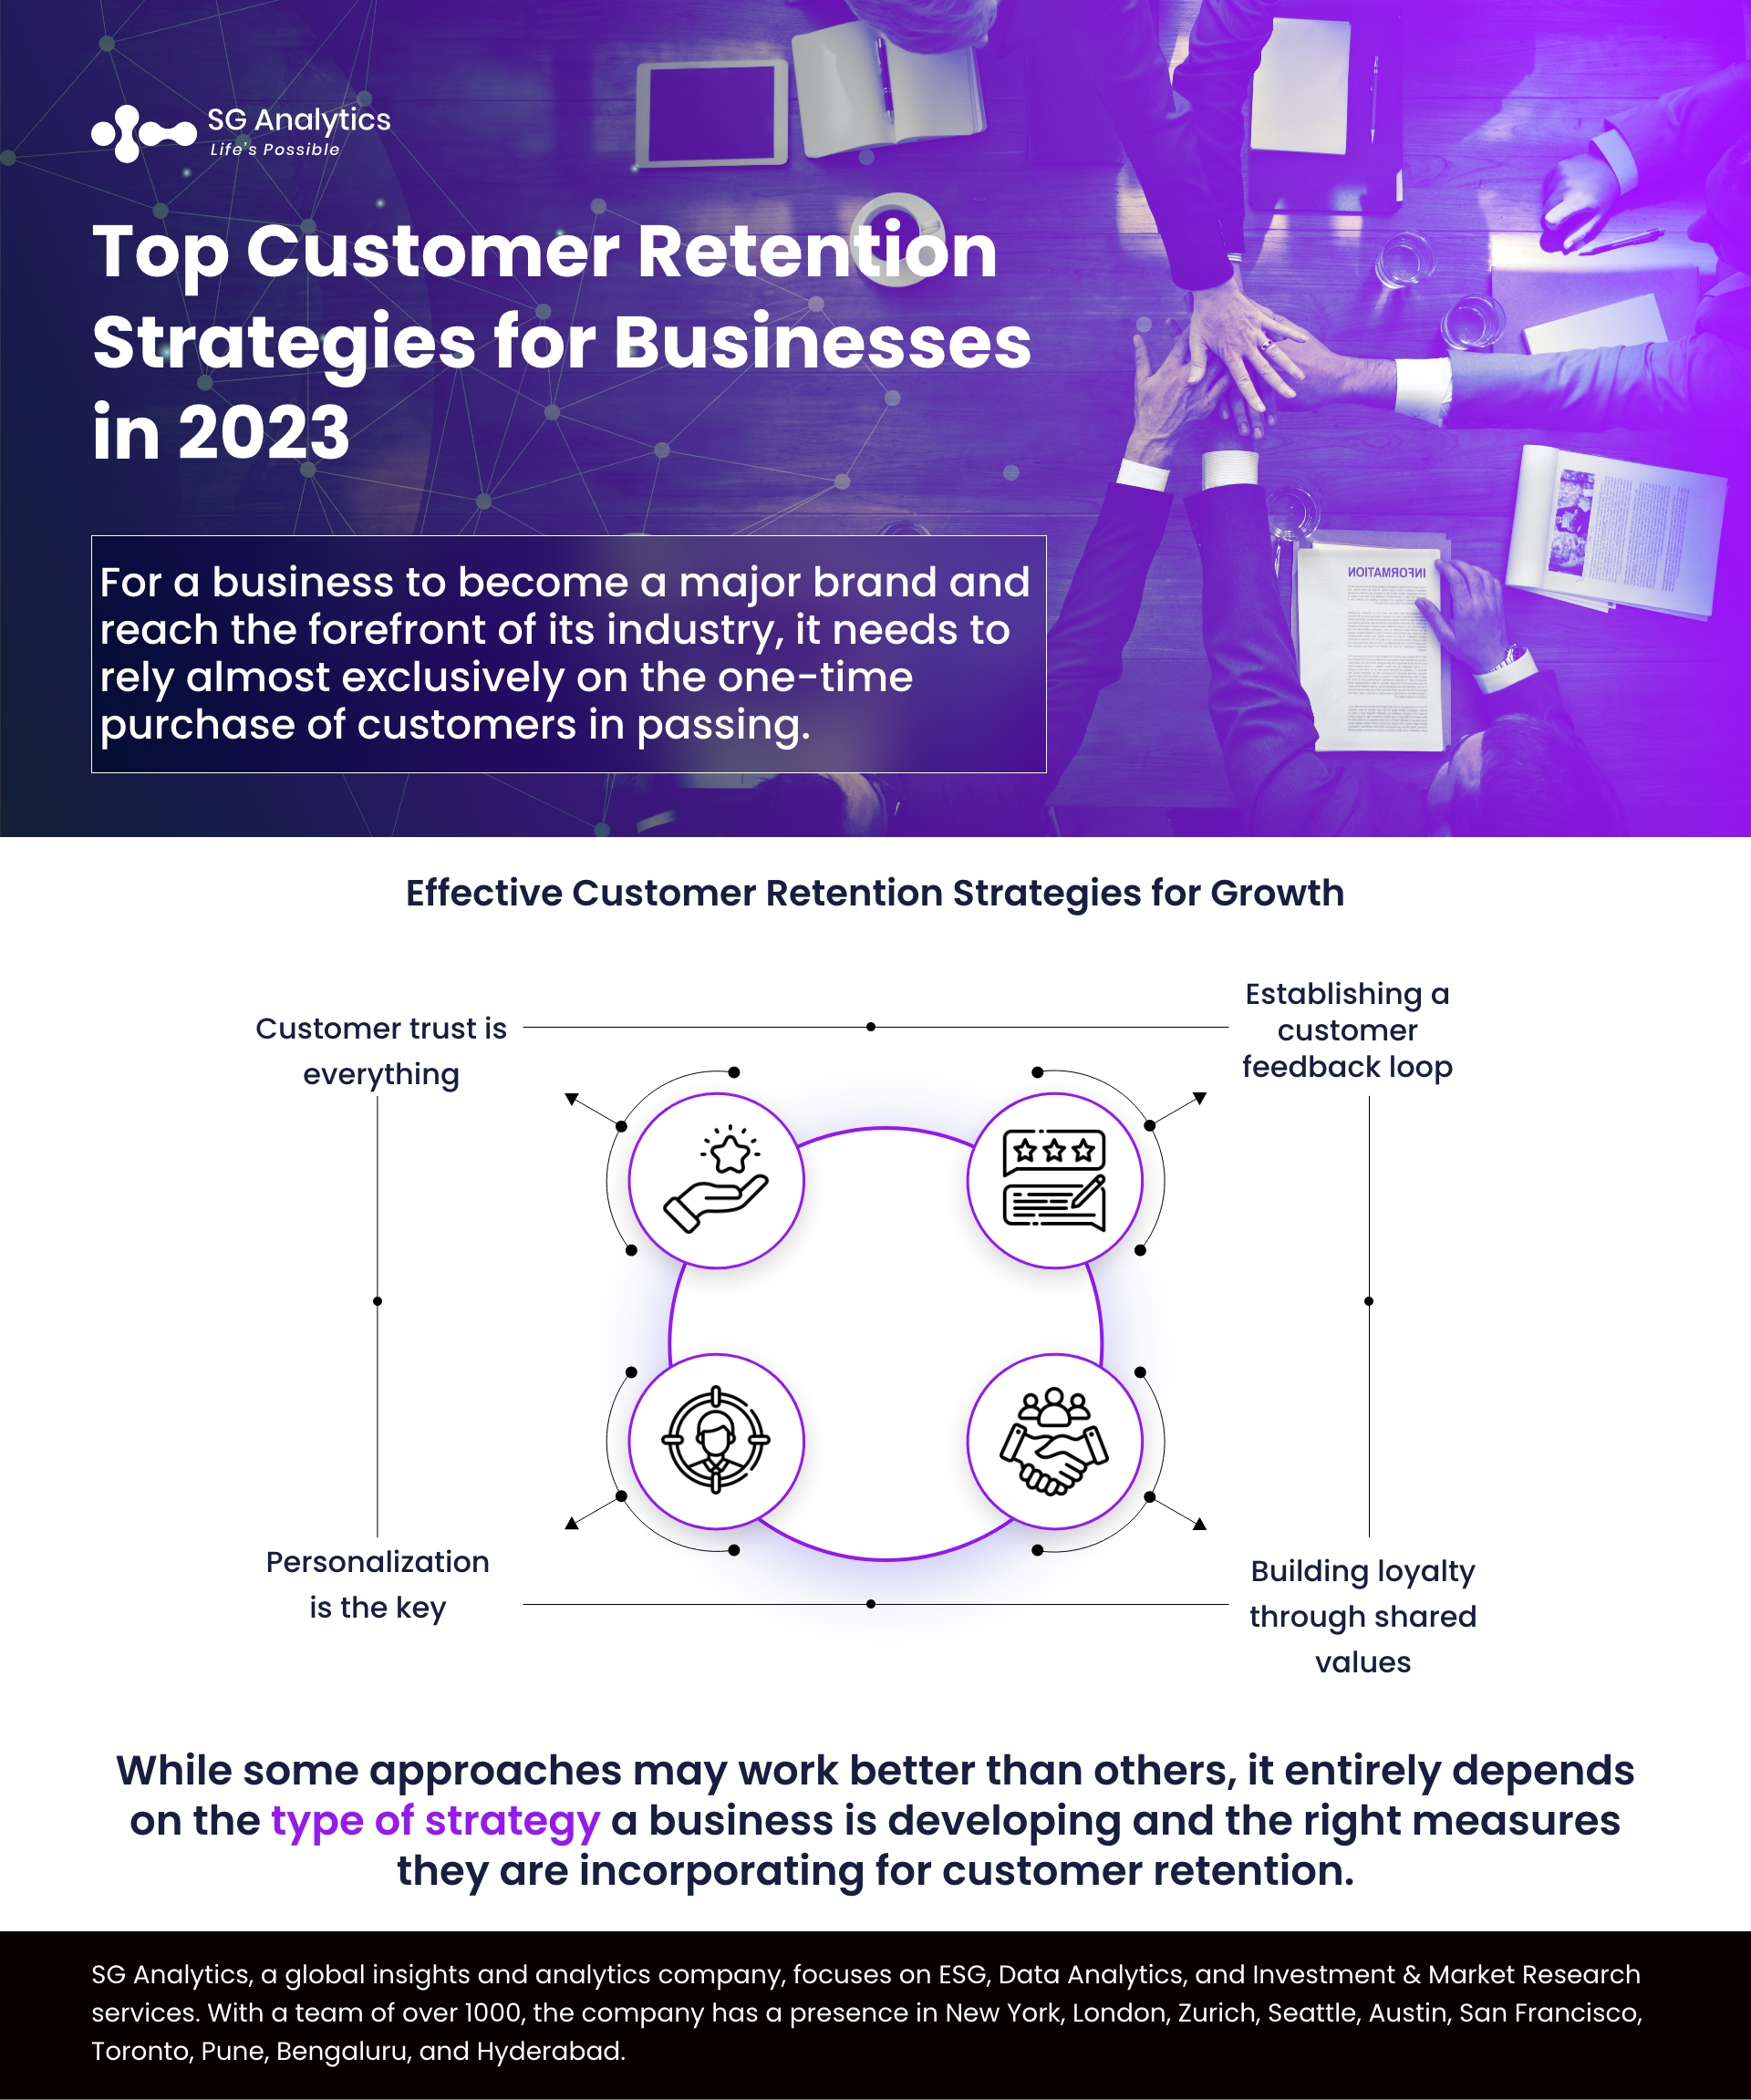 Top Customer Retention Strategies for Businesses in 2023